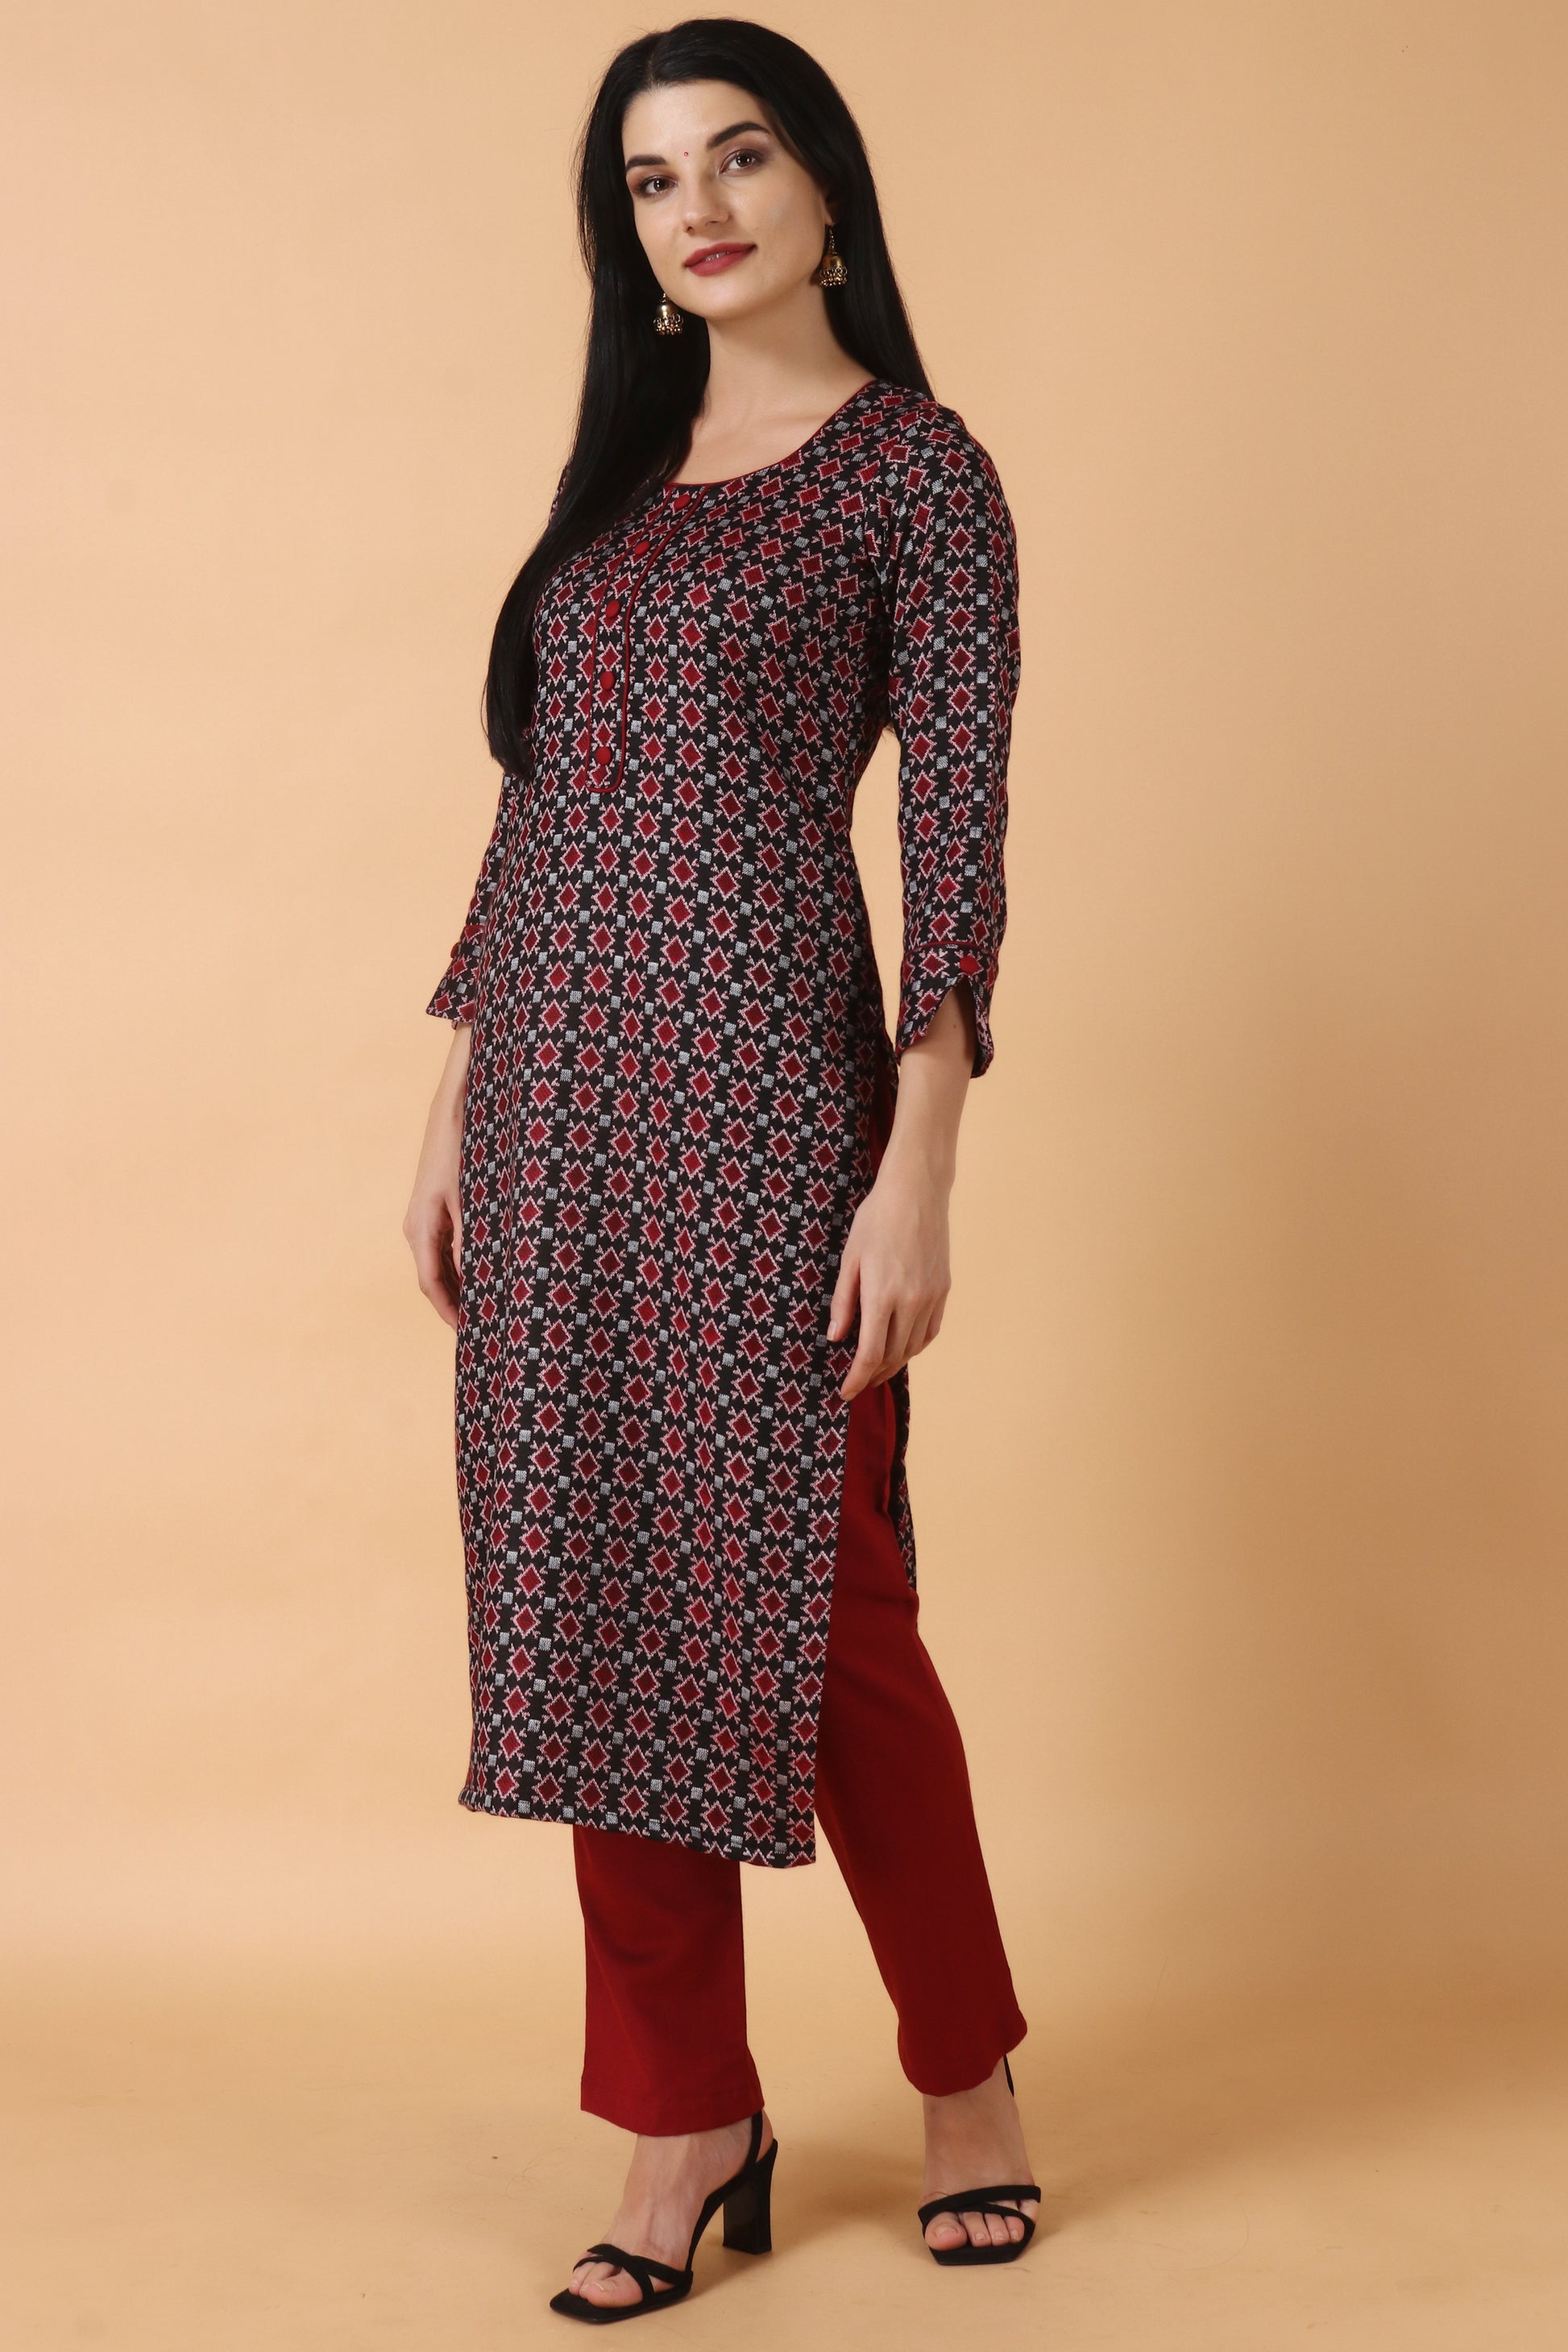 3/4 Sleeves in V-Cut, All Size, Cashmilon, Double Pockets, Drawstring, Dual Pockets, Elastic, Maroon, Mock Buttons, One Side Pocket, Plus Size, Round Neckline, Two Side Pockets, Winter, Winte